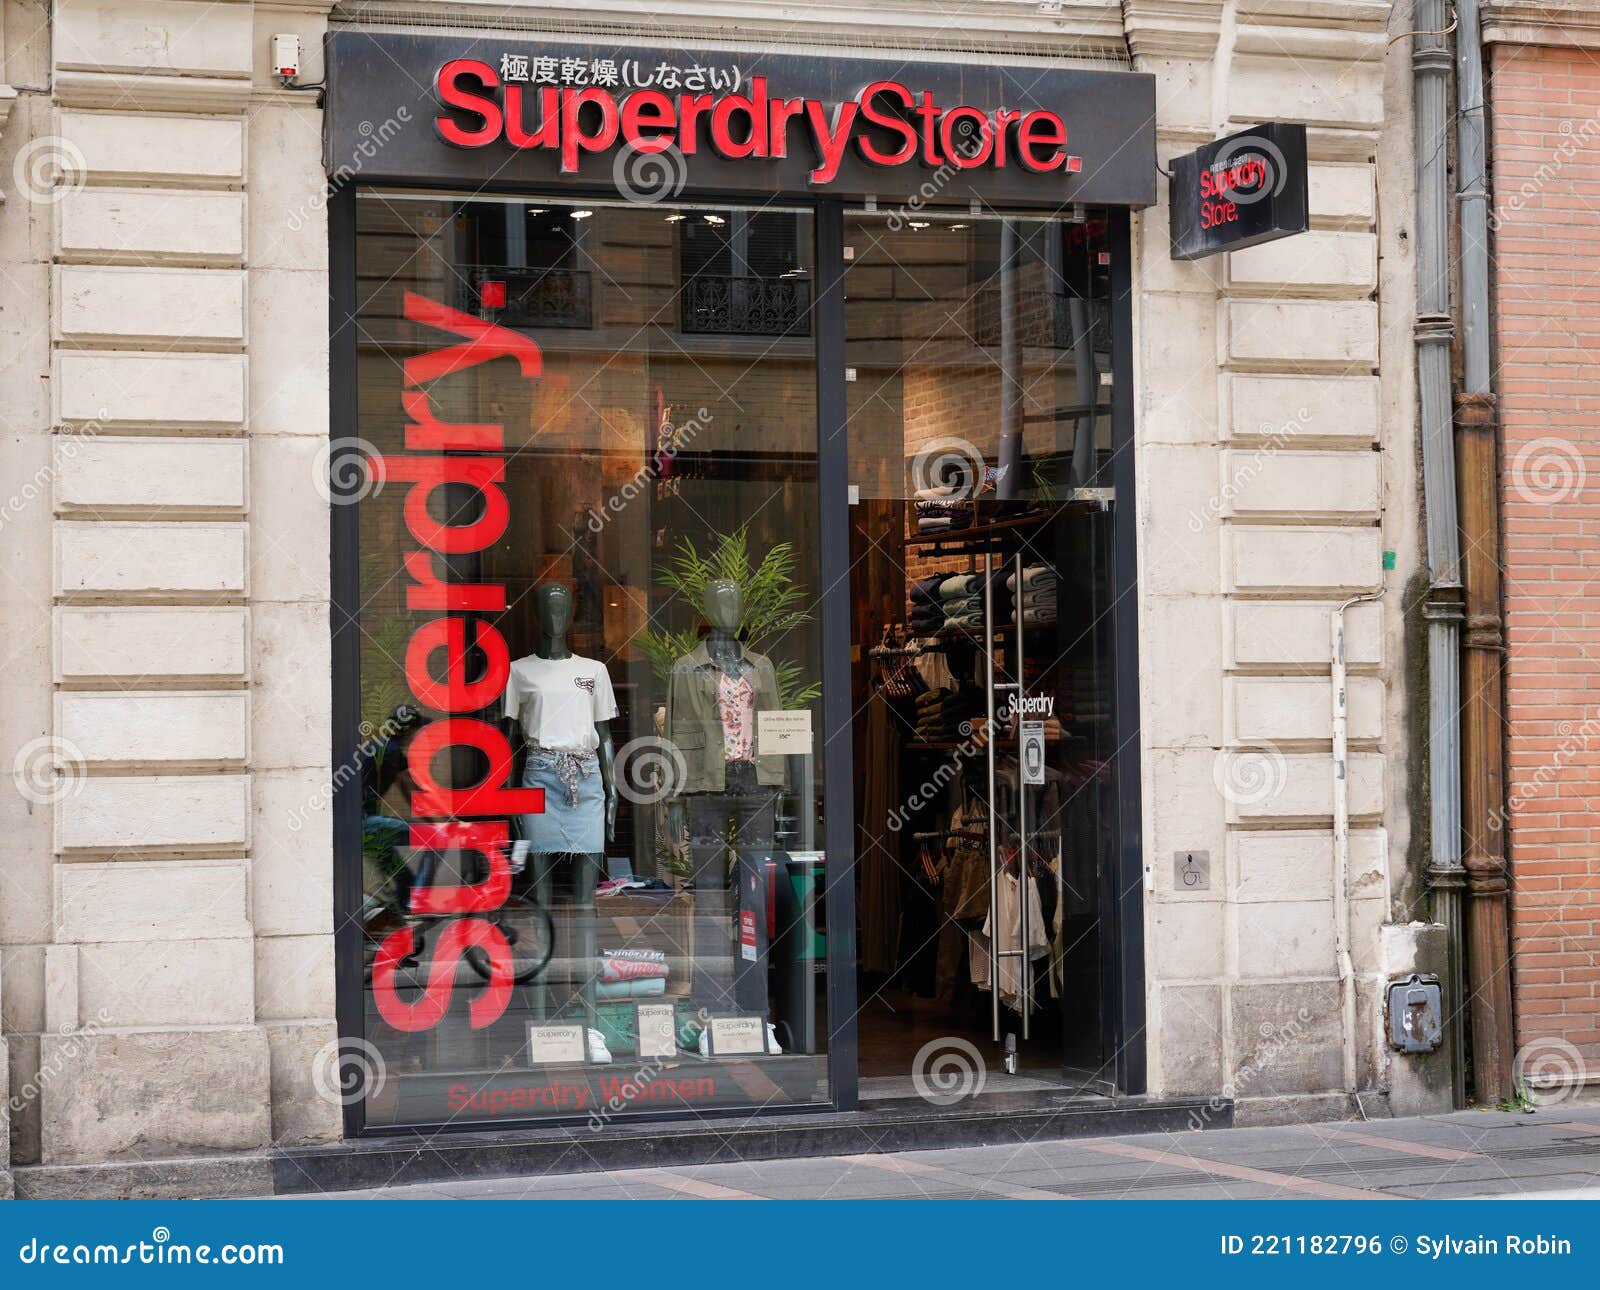 Superdry Logo Brand Fashion Shop and Text Sign Store on Facade